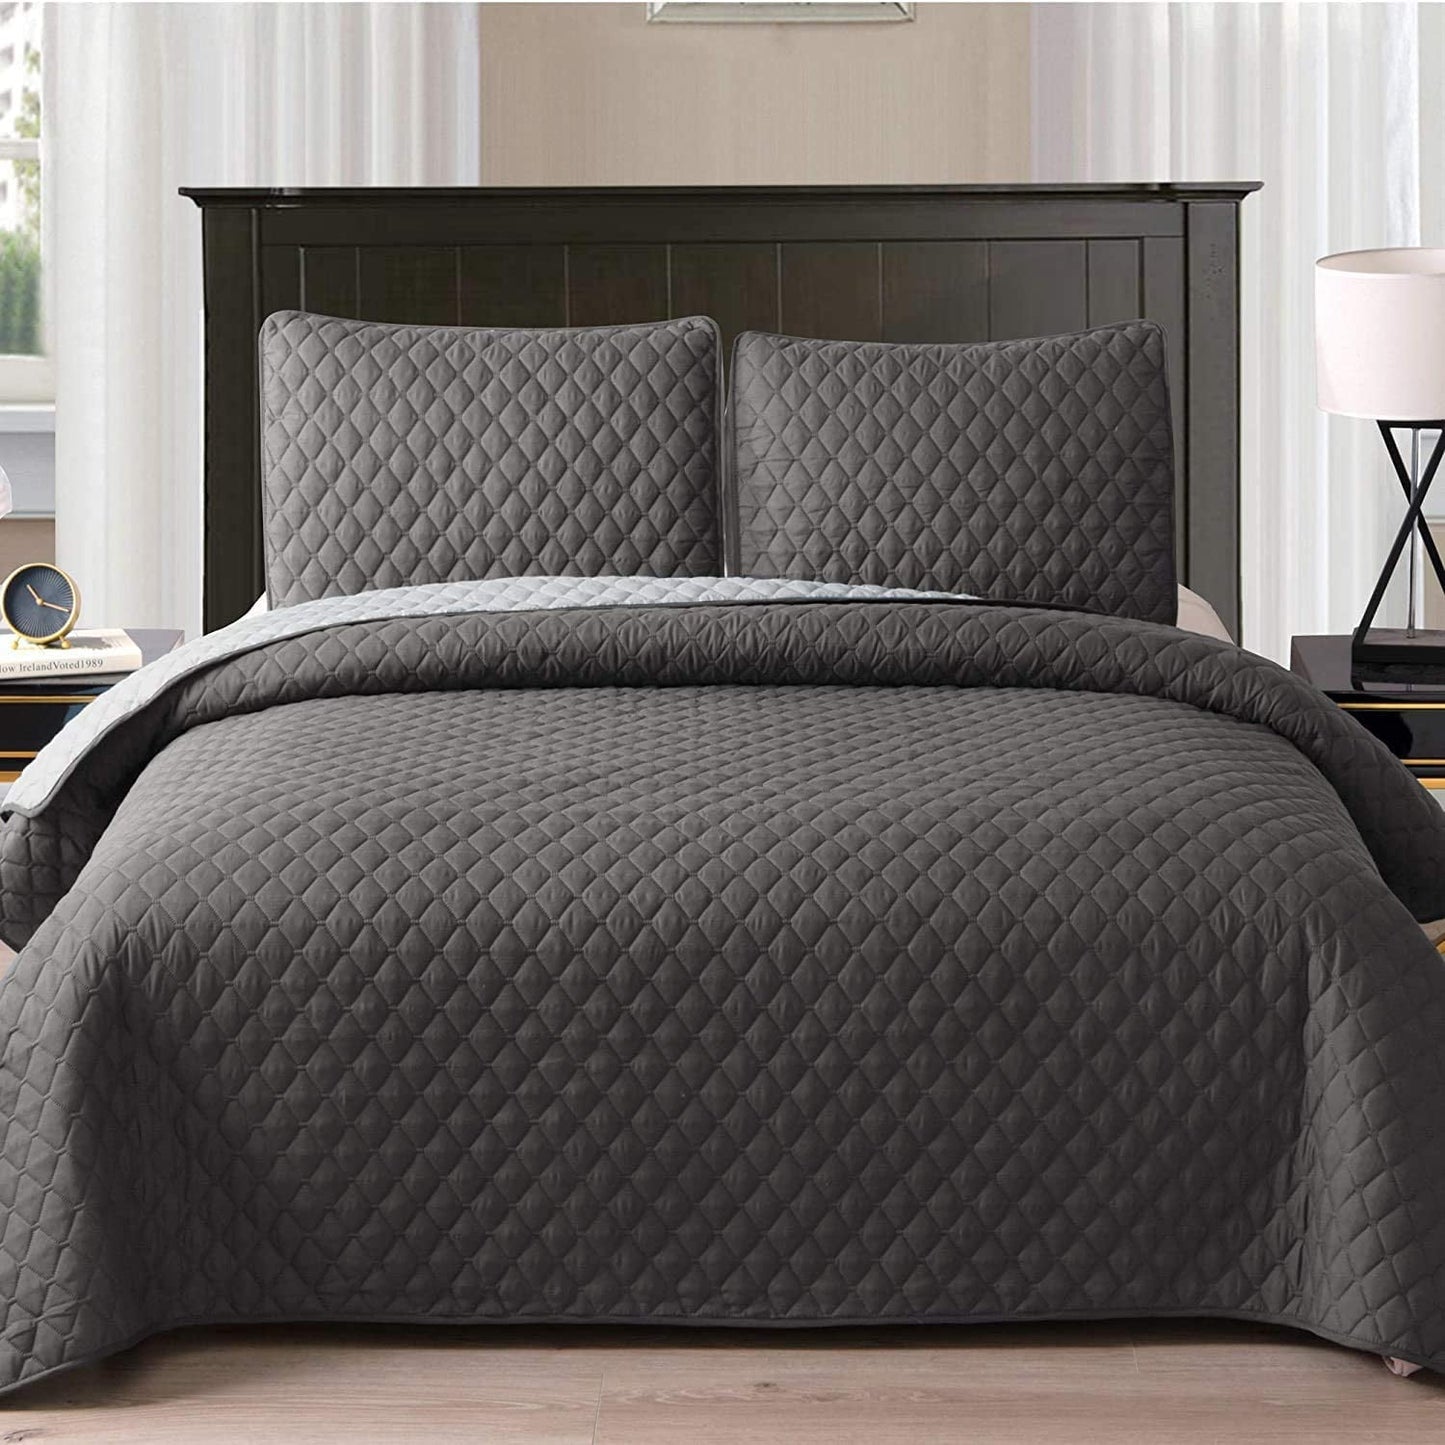 Exclusivo Mezcla Ultrasonic Reversible 3-Piece King Size Quilt Set with Pillow Shams, Lightweight Bedspread/Coverlet/Bed Cover - (Grey, 92"x104")